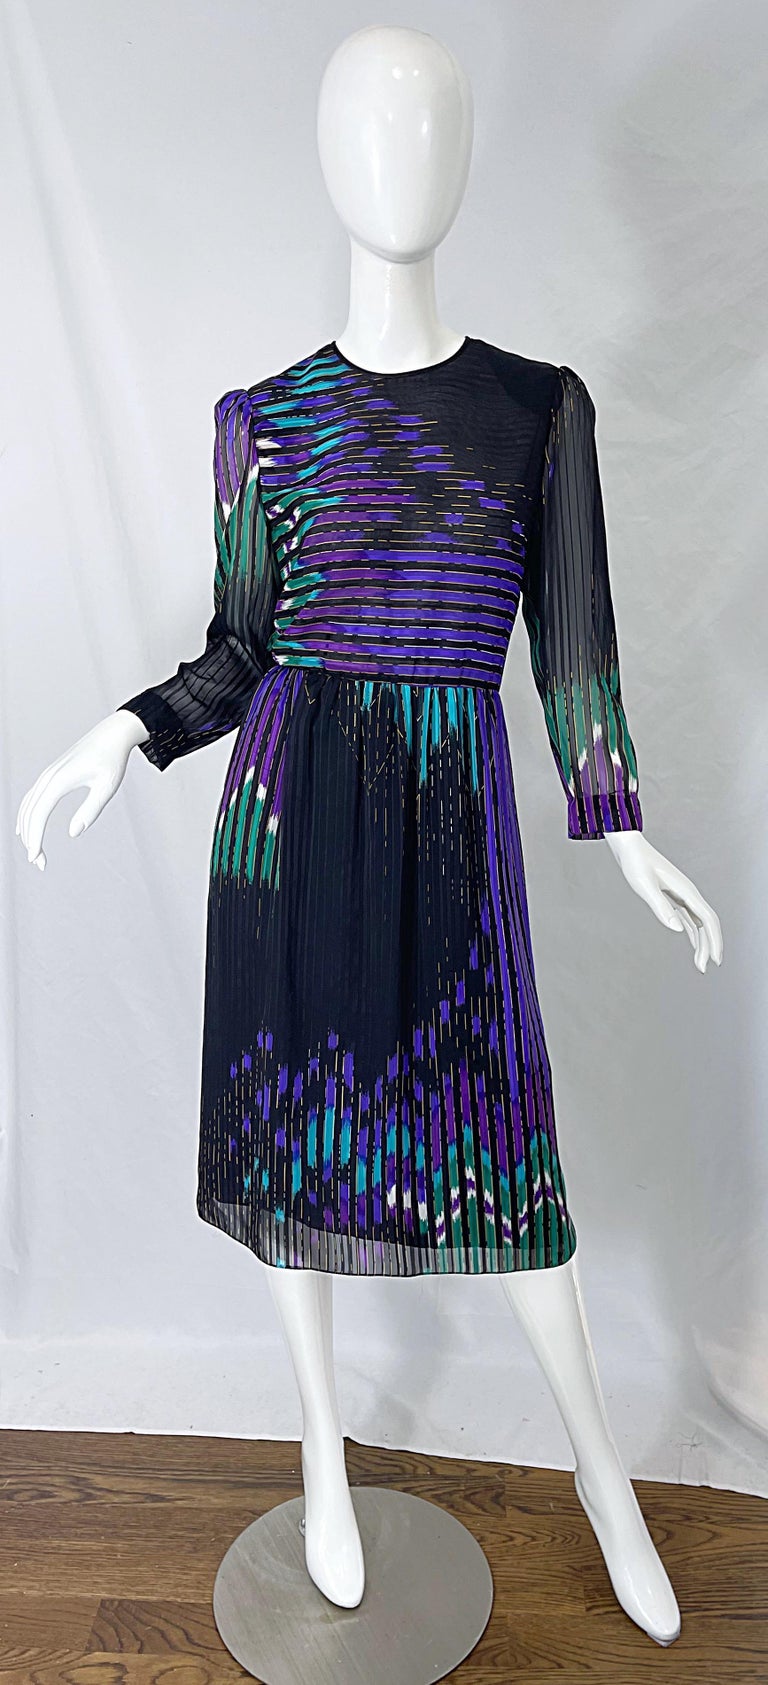 Amazing early 1980s Japanese designer HANAE MORI for NEIMAN MARCUS abstract print long sleeve silk chiffon dress ! Features a black background with vibrant pops of abstract shapes and chevron stripes of purple, green, turquoise, blue and white. Very